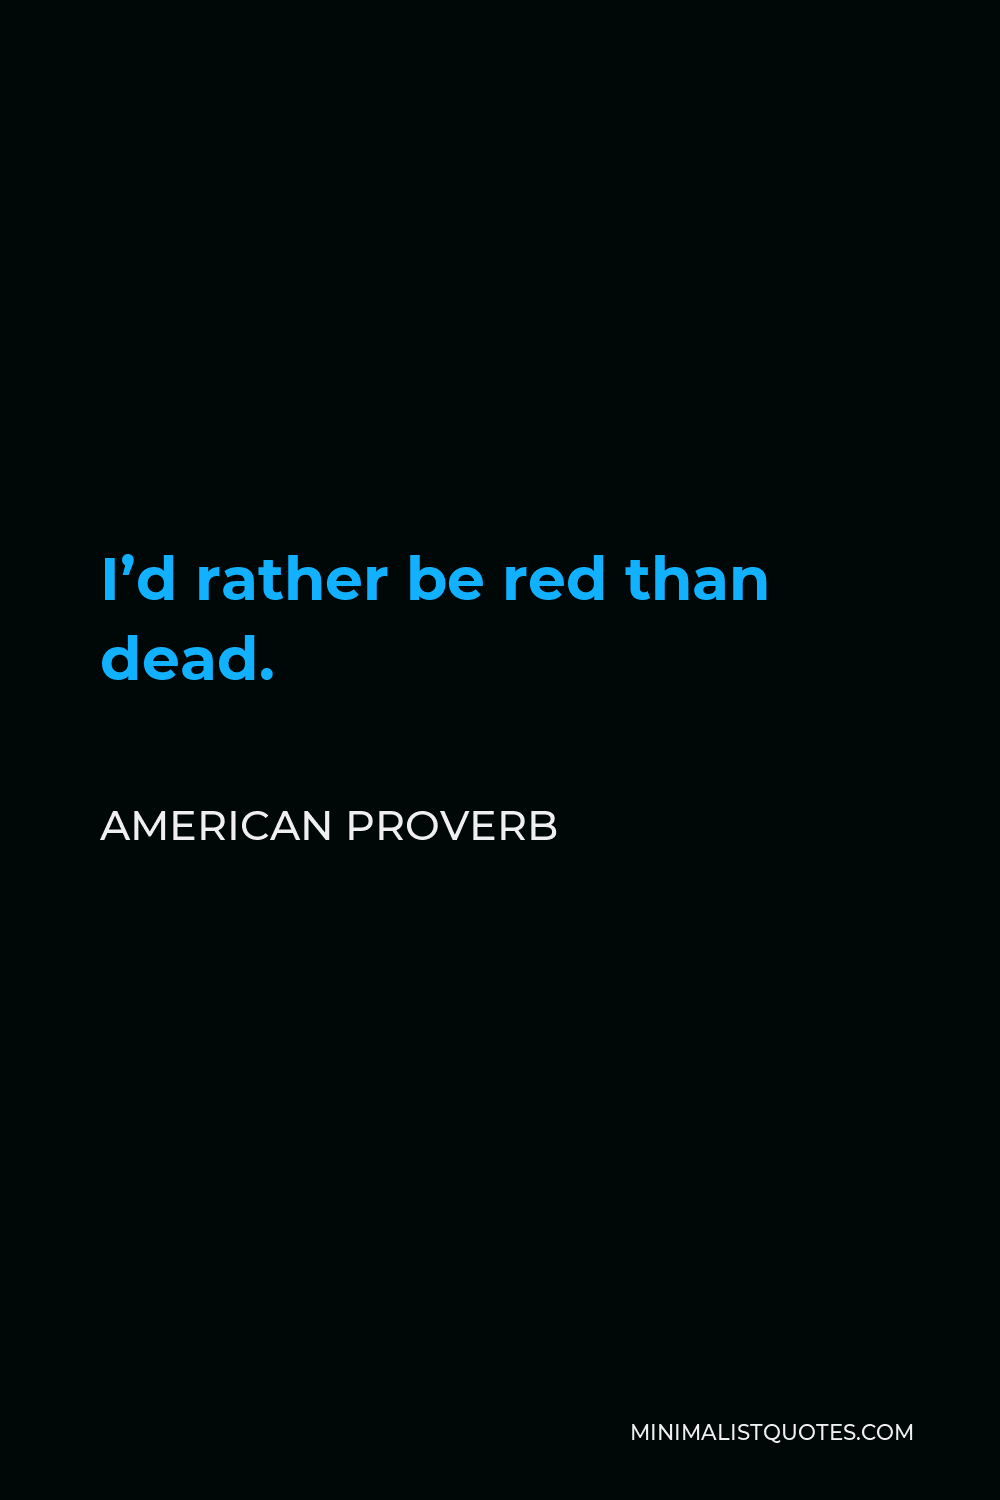 American Proverb Quote - I’d rather be red than dead.